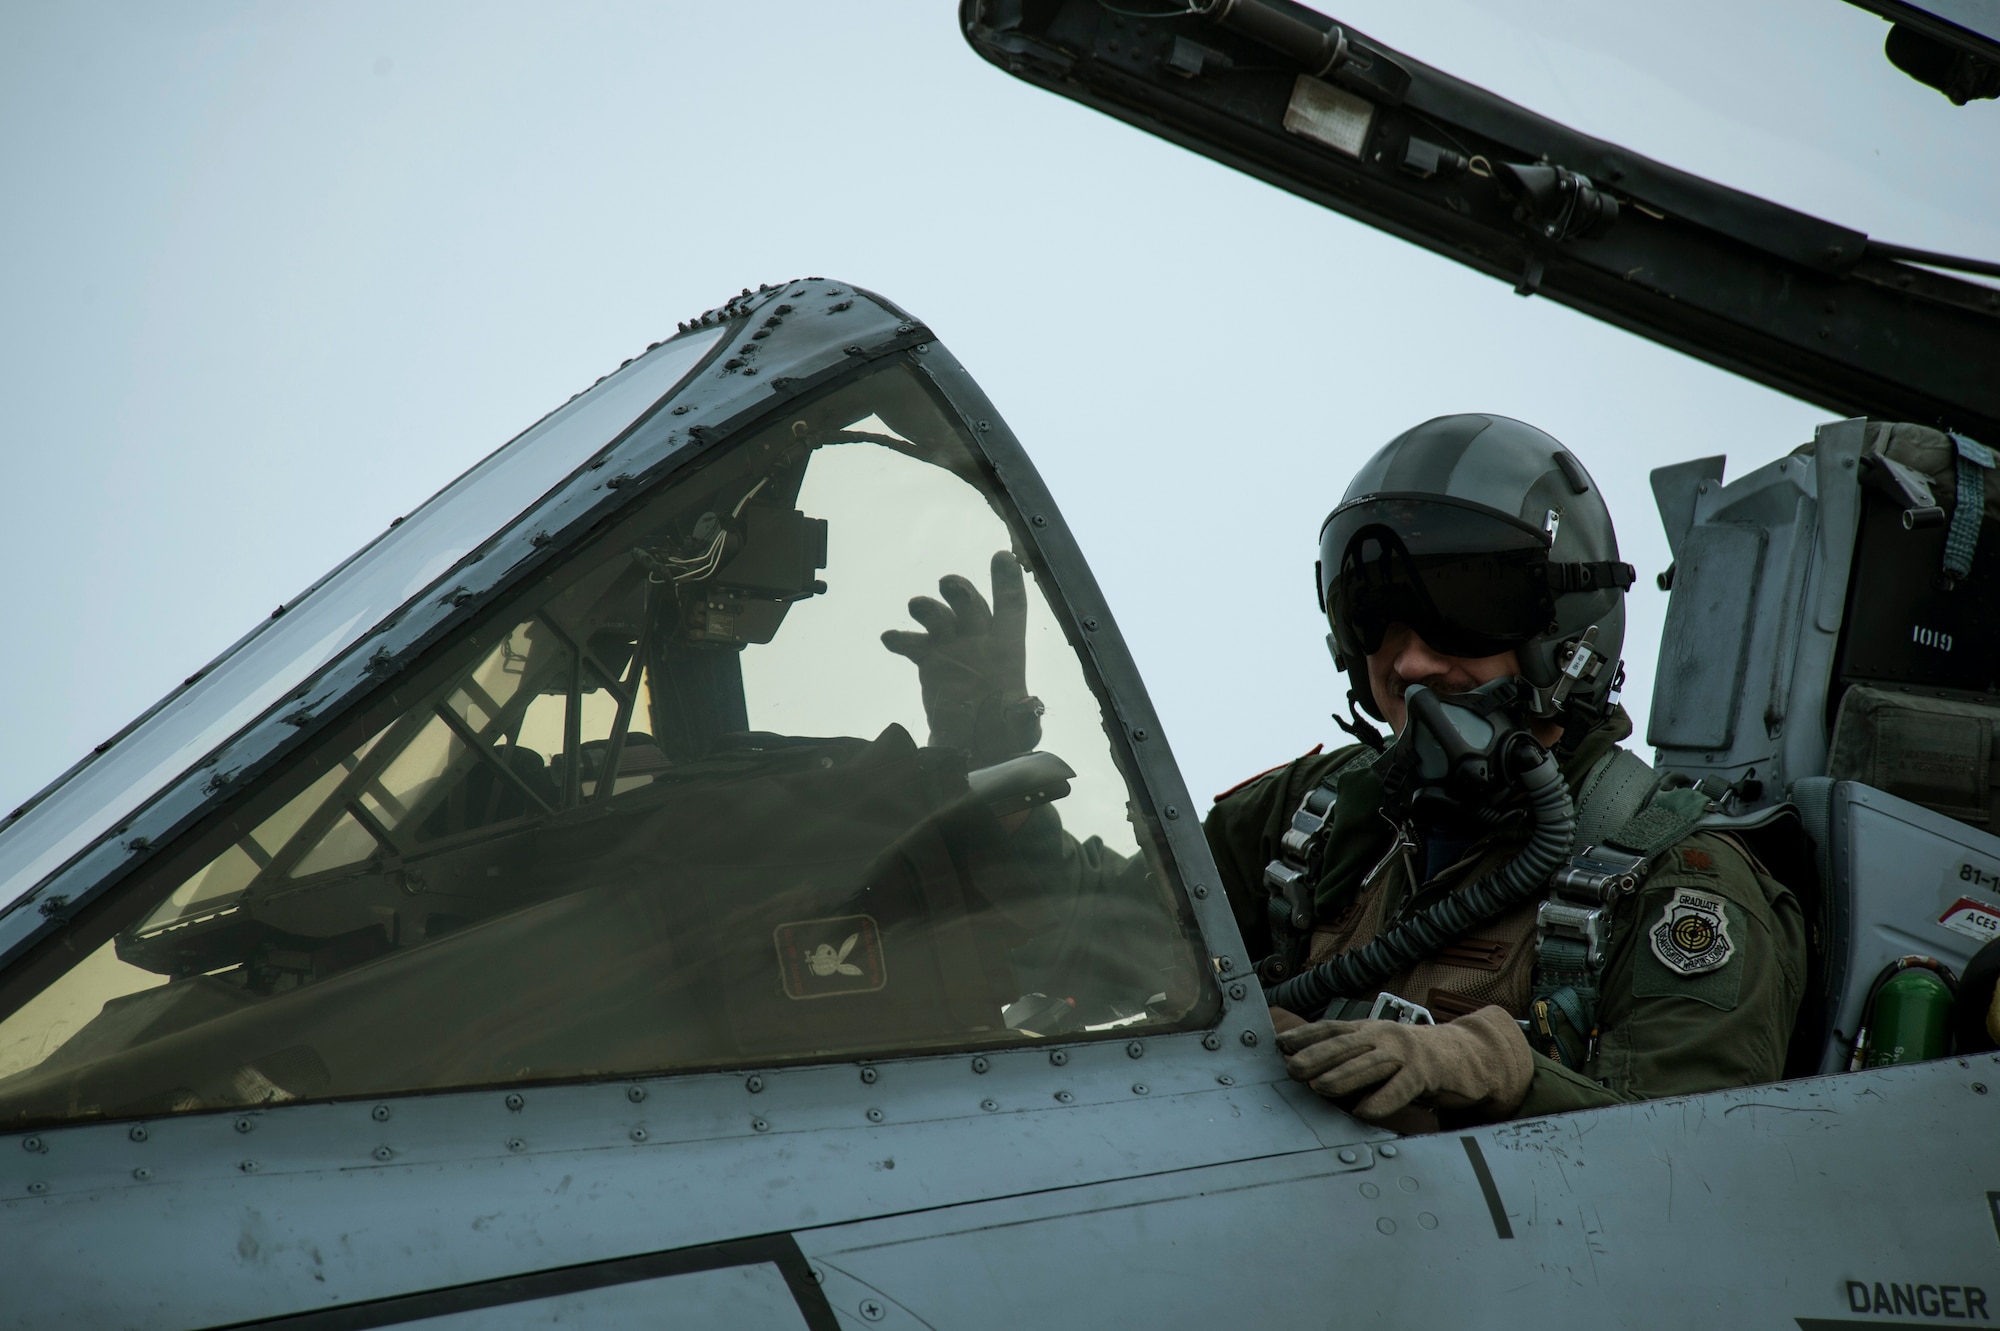 A U.S. Air Force A-10 Thunderbolt II attack aircraft pilot waves from his jet on the flightline May 1, 2015, at Ämari Air Base, Estonia. The A-10 supports Air Force missions around the world as part of the U.S. Air Force's current inventory of strike platforms, including the F-15 Strike Eagle and the F-16 Fighting Falcon fighter aircraft. (U.S. Air Force photo by Senior Airman Rusty Frank/Released)